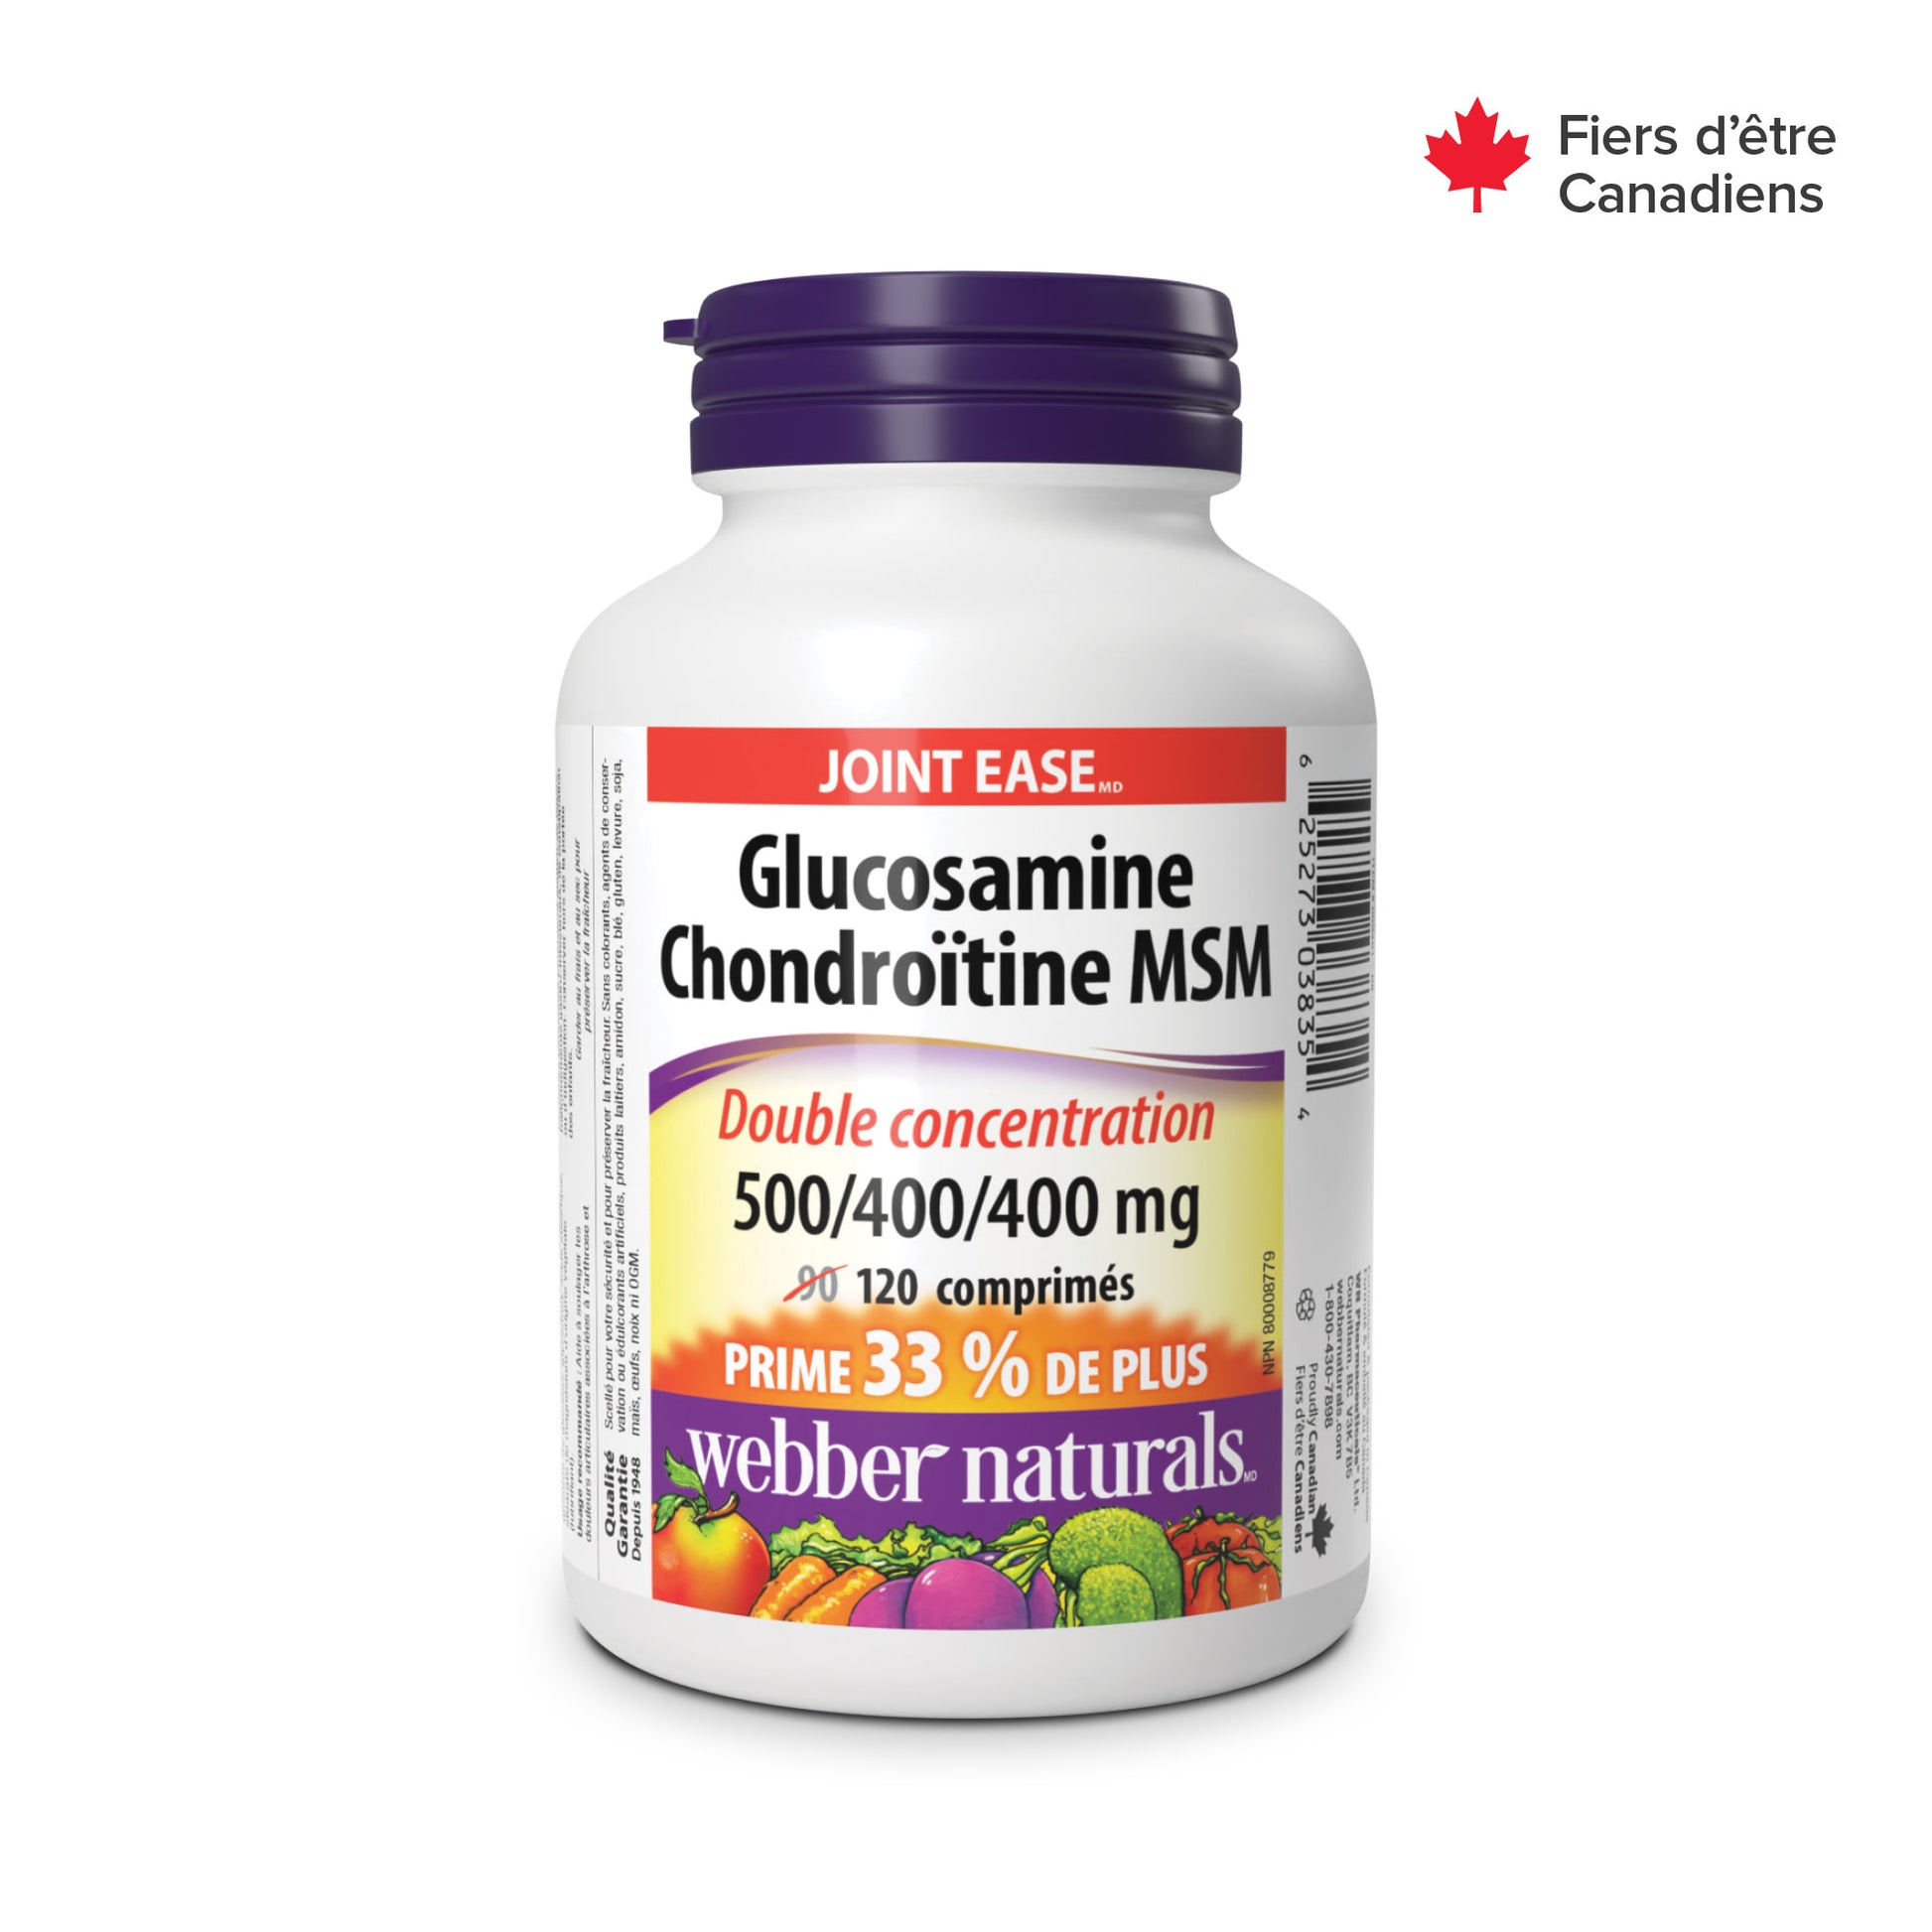 Glucosamine Chondroitin MSM Double Strength 500/400/400 mg for Webber Naturals|v|hi-res|WN3835